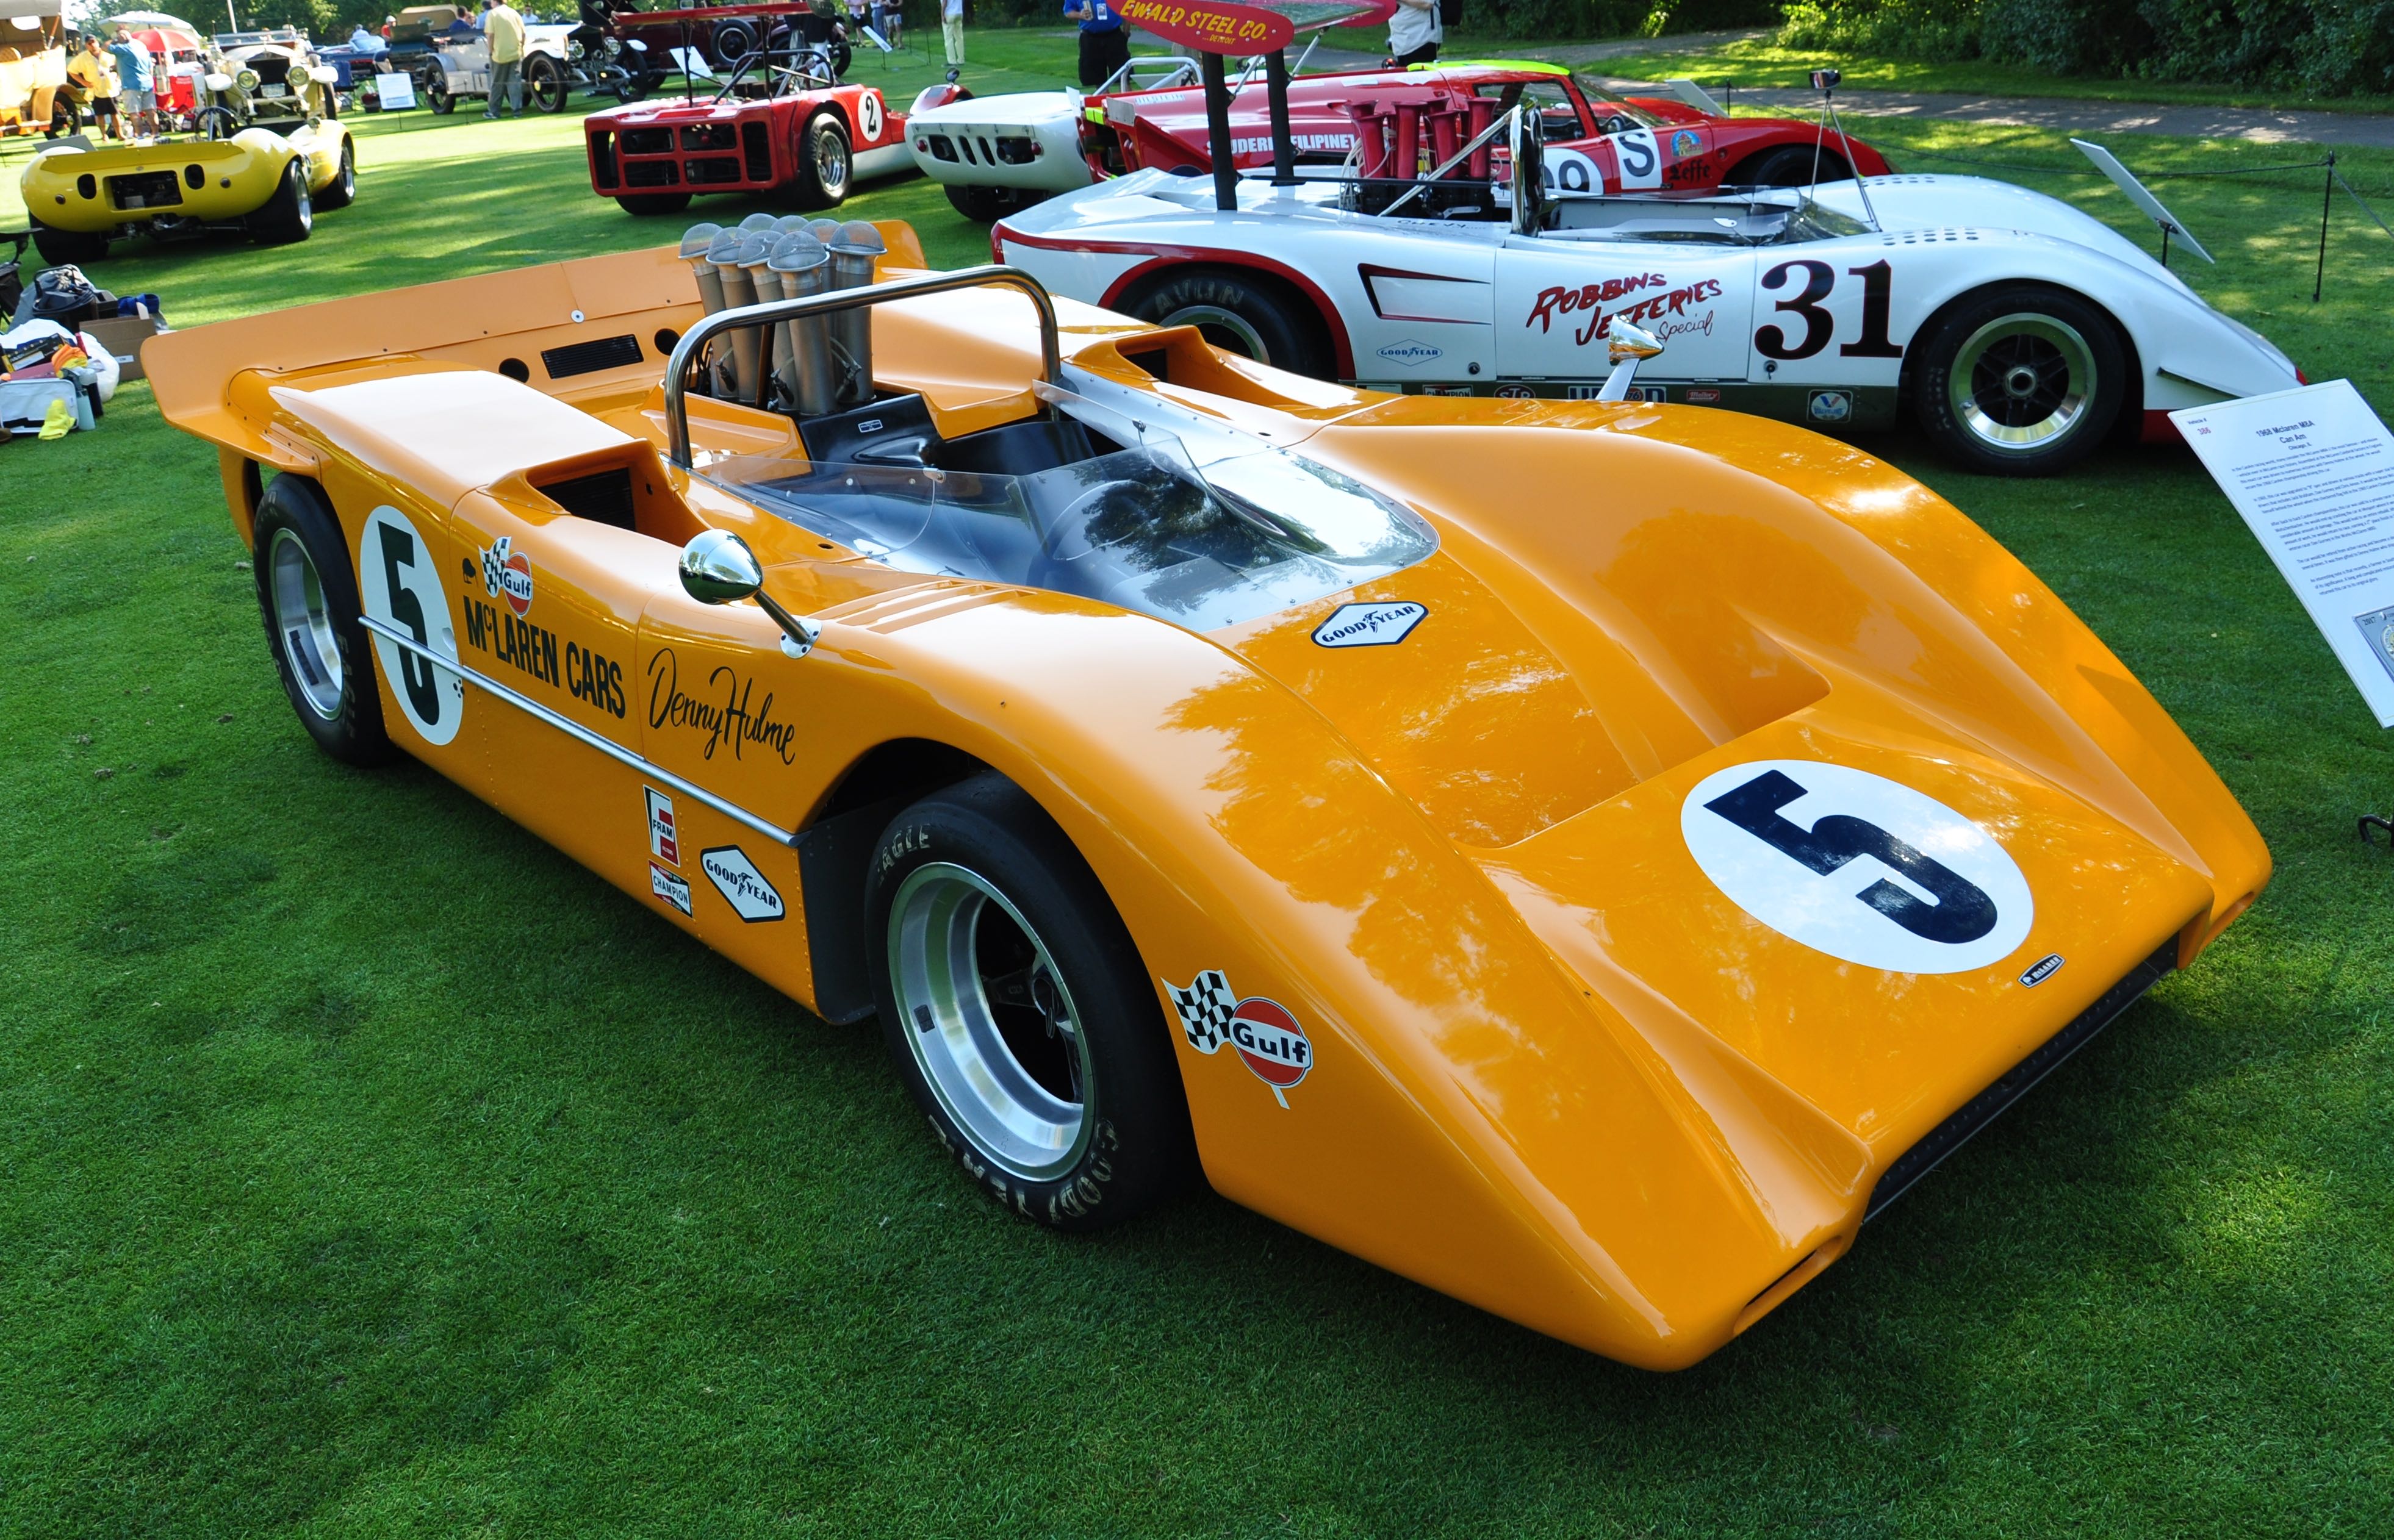 Classics were there, too, but Concours America also includes Can-Am racers and other classes | Steve Purdy photos